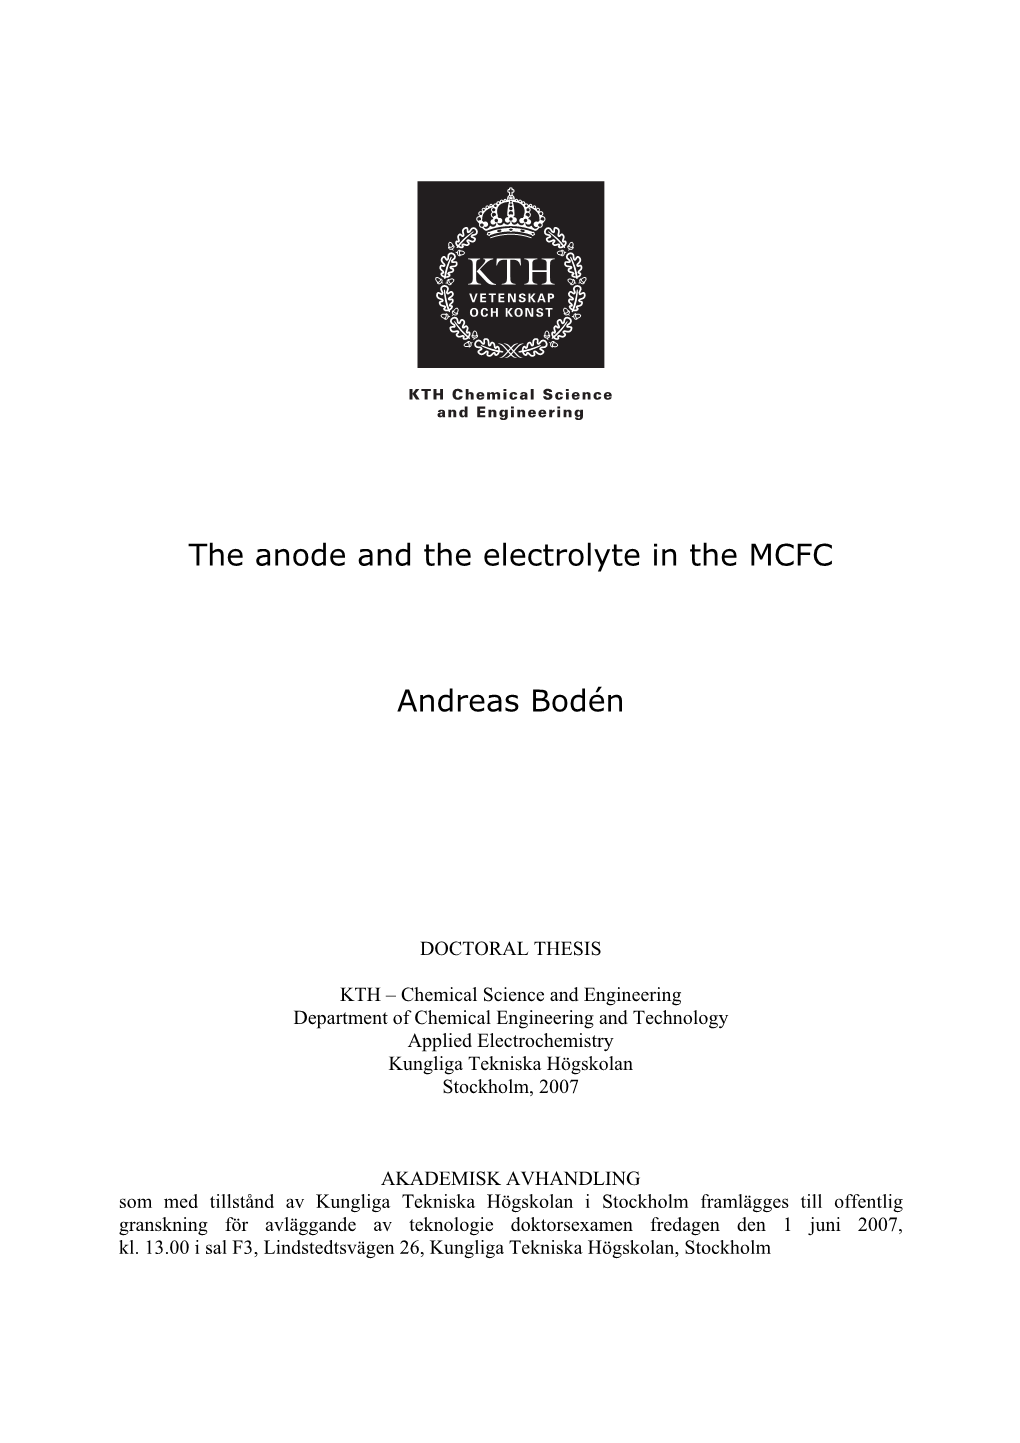 The Anode and the Electrolyte in the MCFC Andreas Bodén